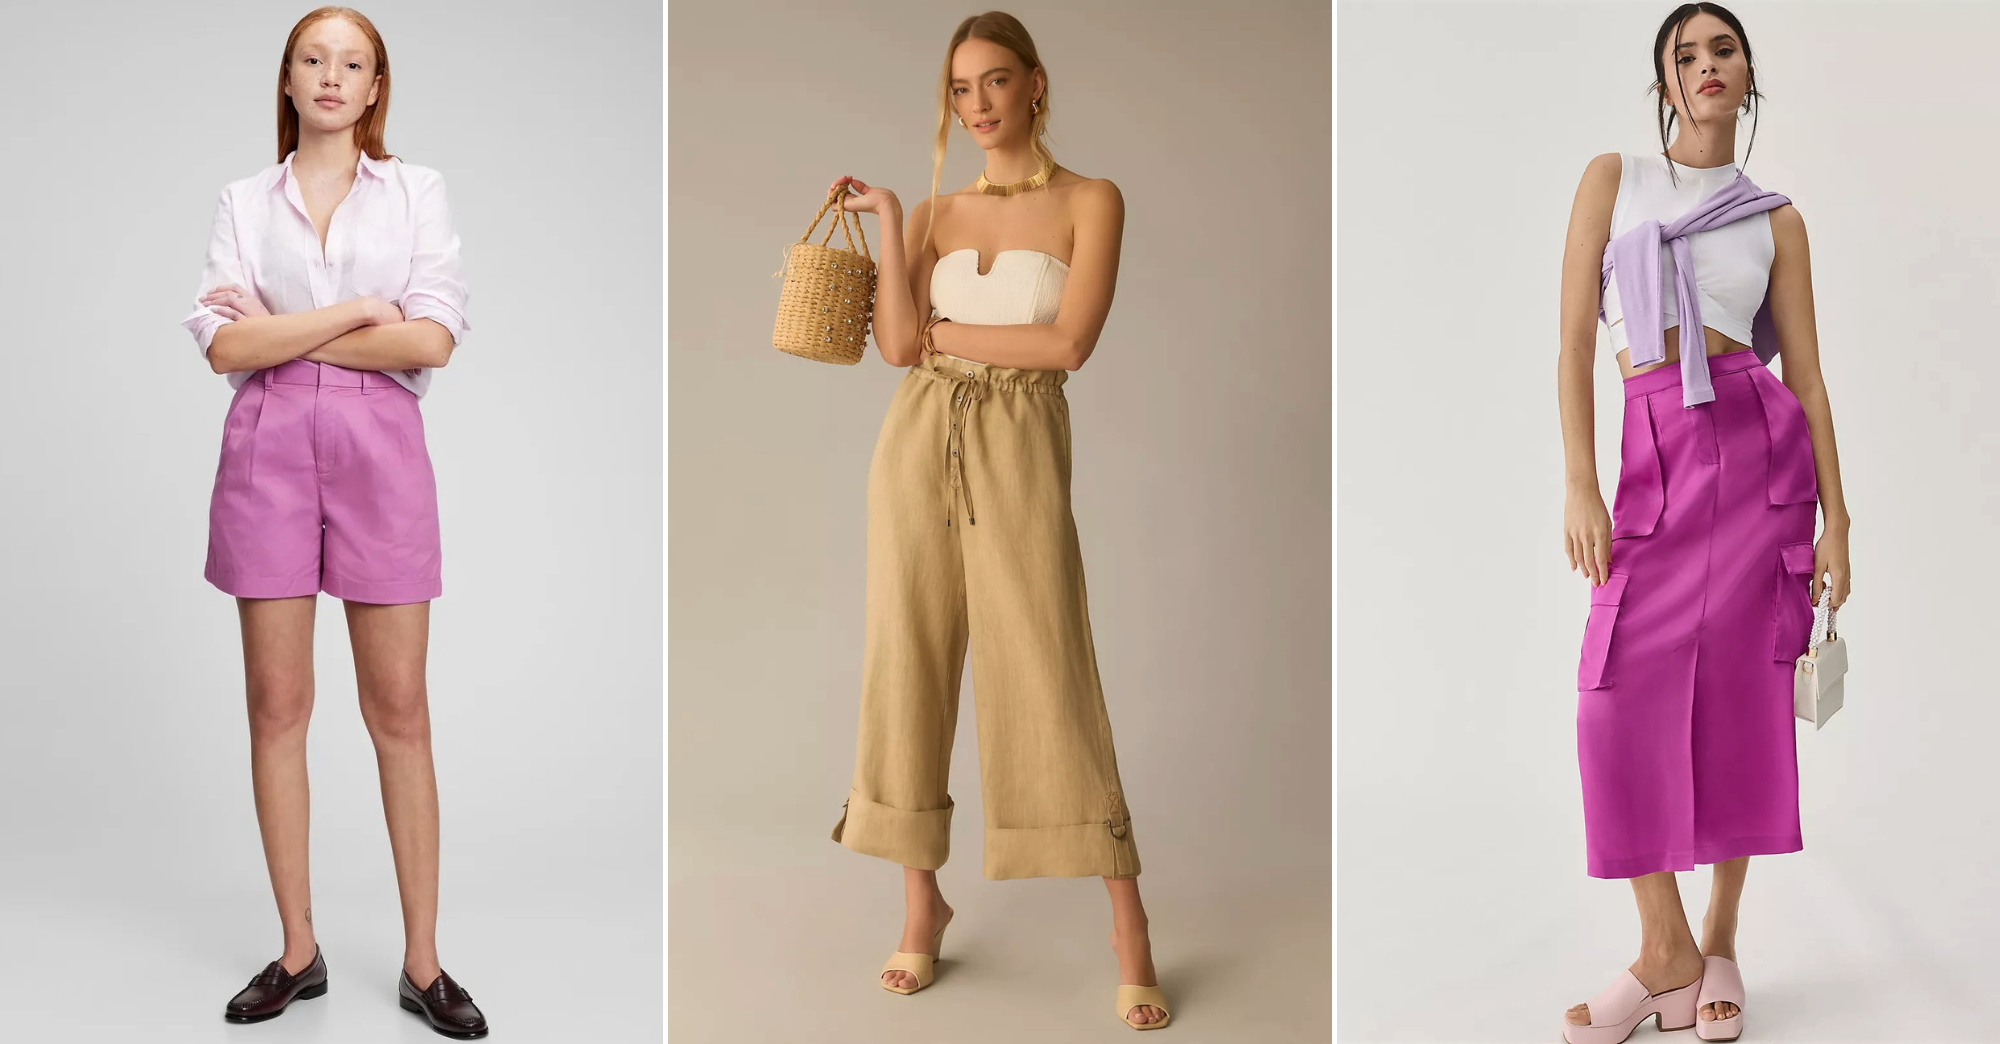 cargo pants, skirts, dresses, and accessories